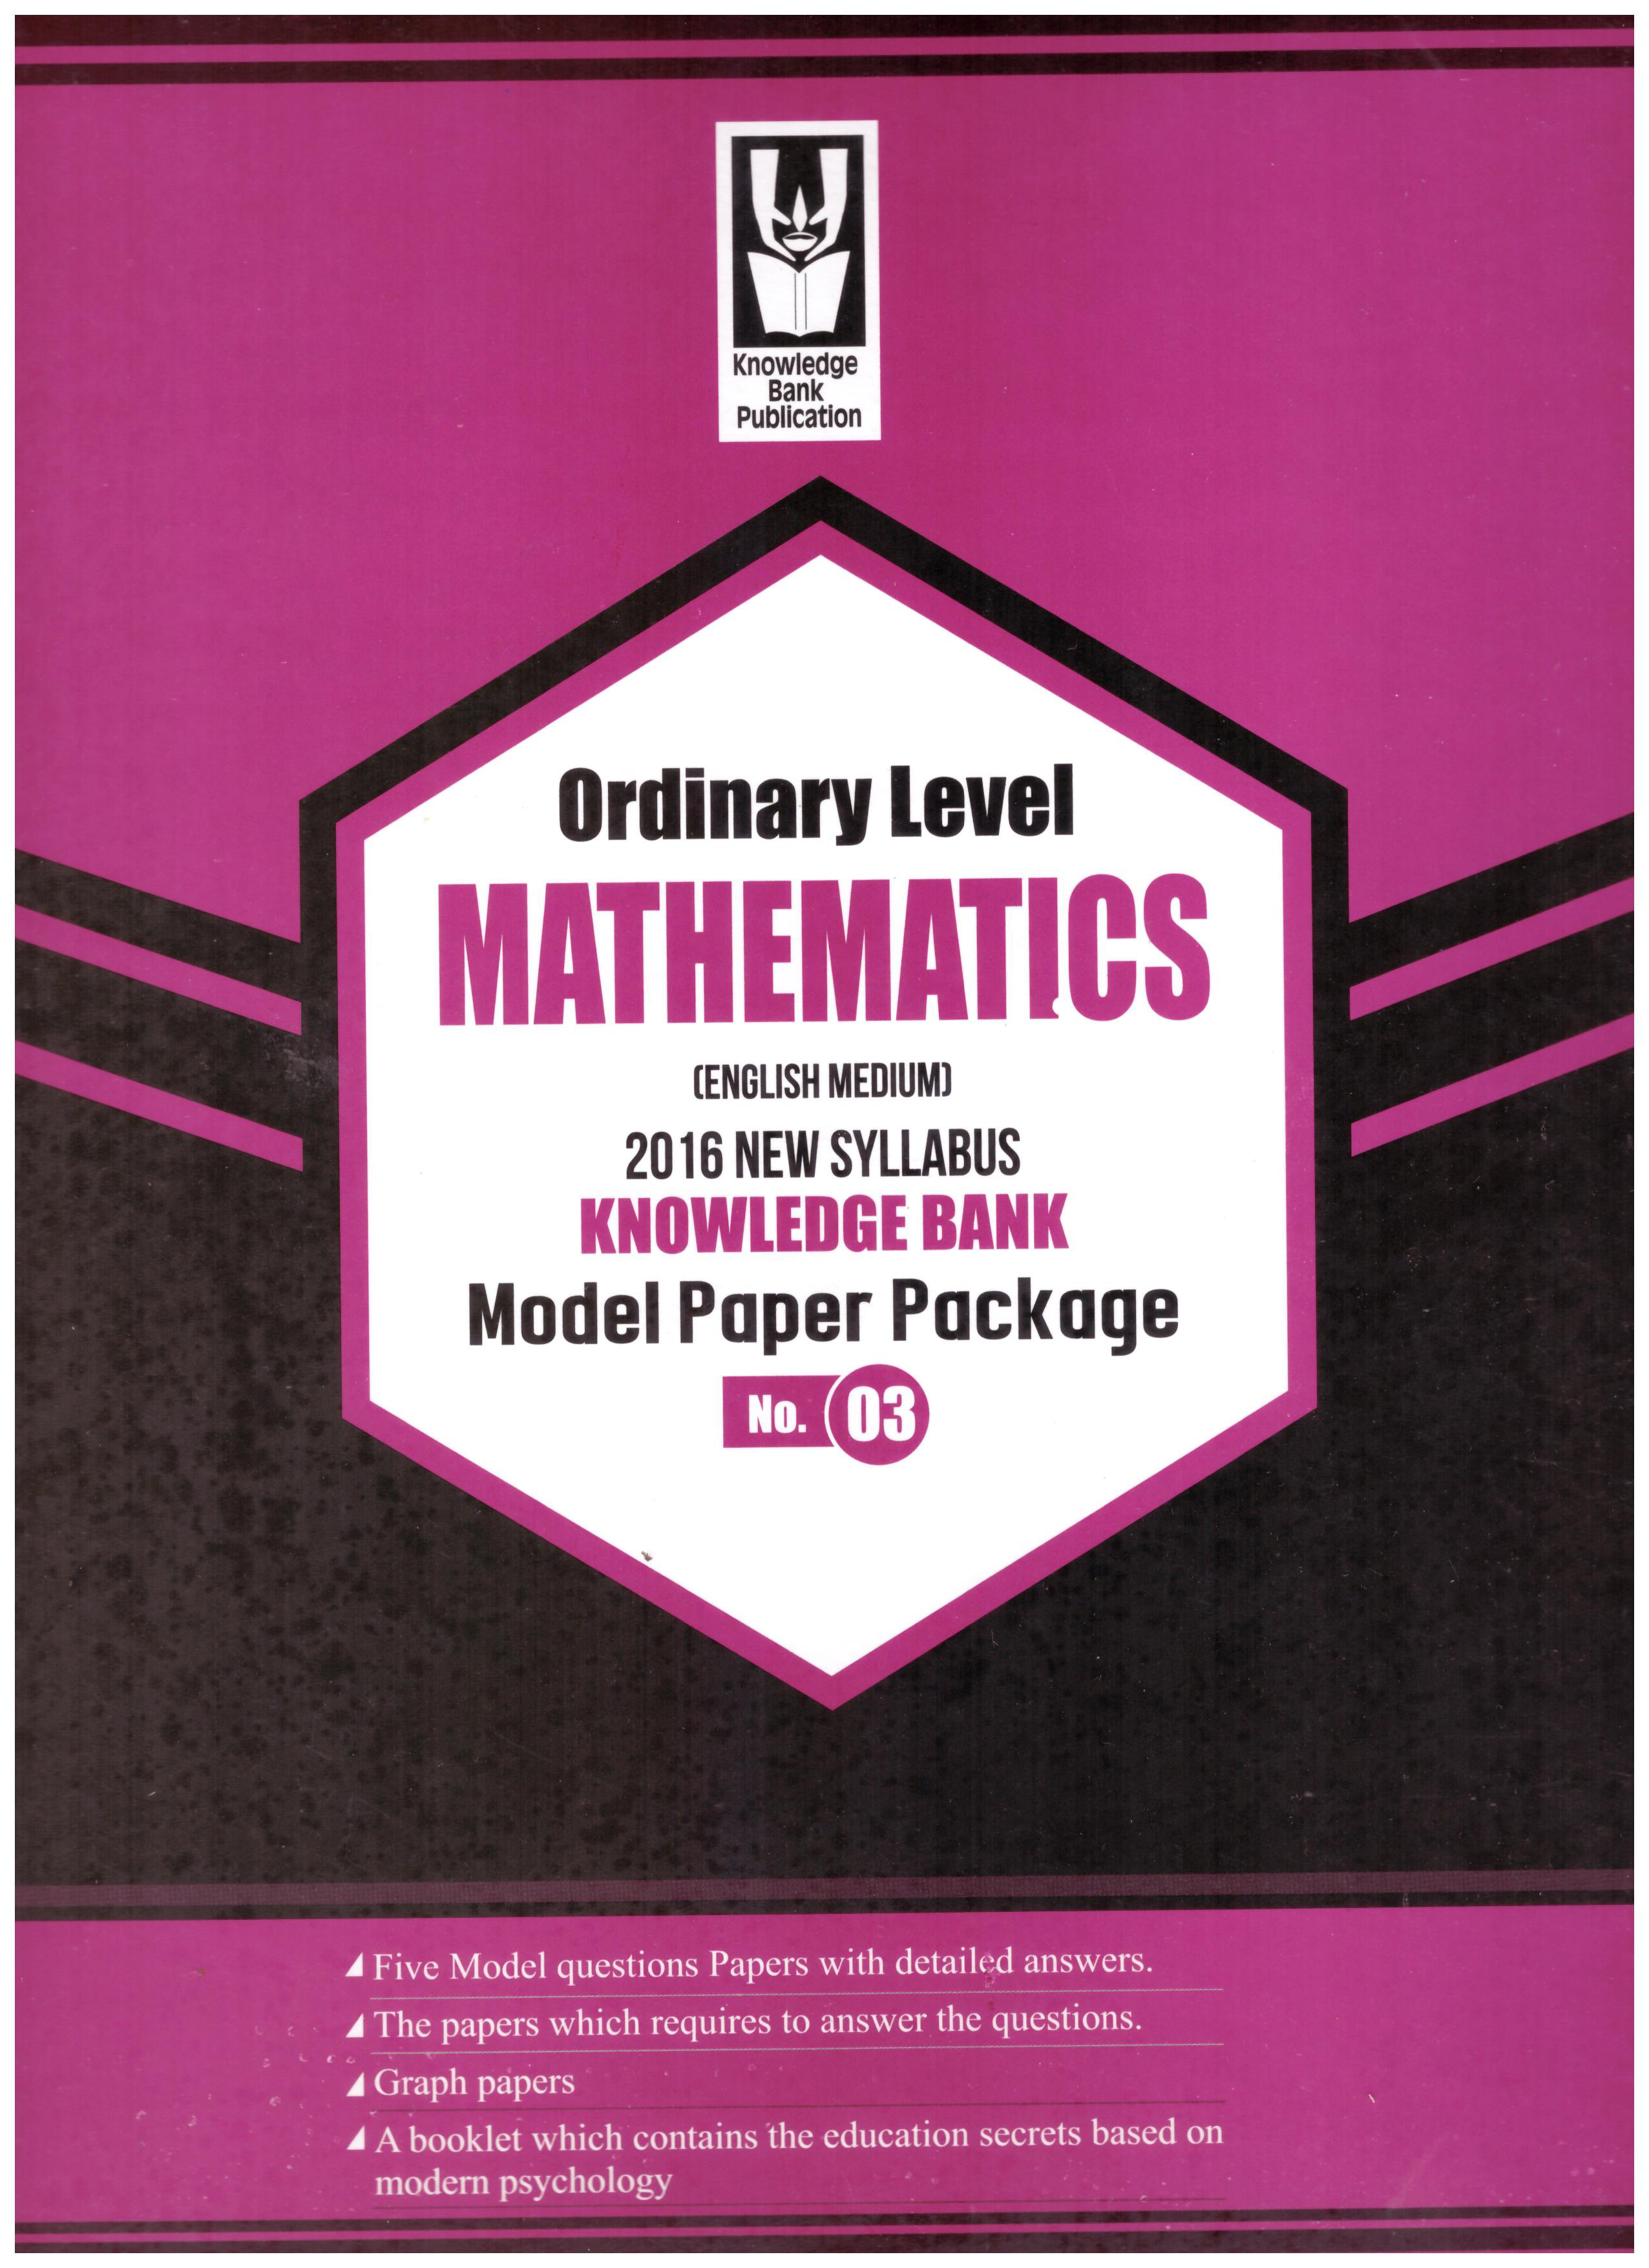 Knowledge Bank O/L Mathematics No3 Model Paper Package 